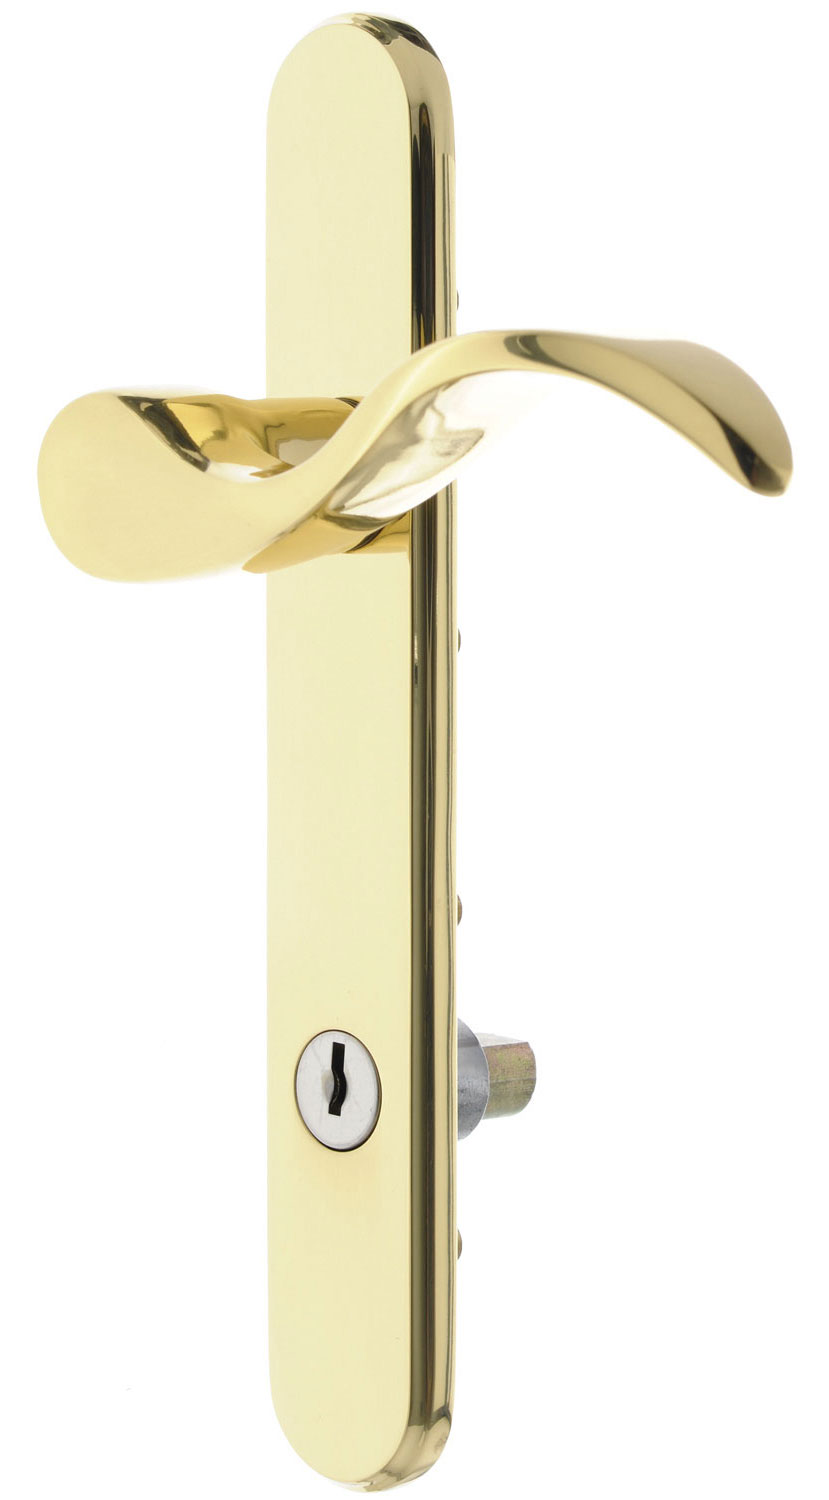 Polished Brass - Door Hardware - Arch Angle Custom Arched Top Storm Windows & Storm Doors